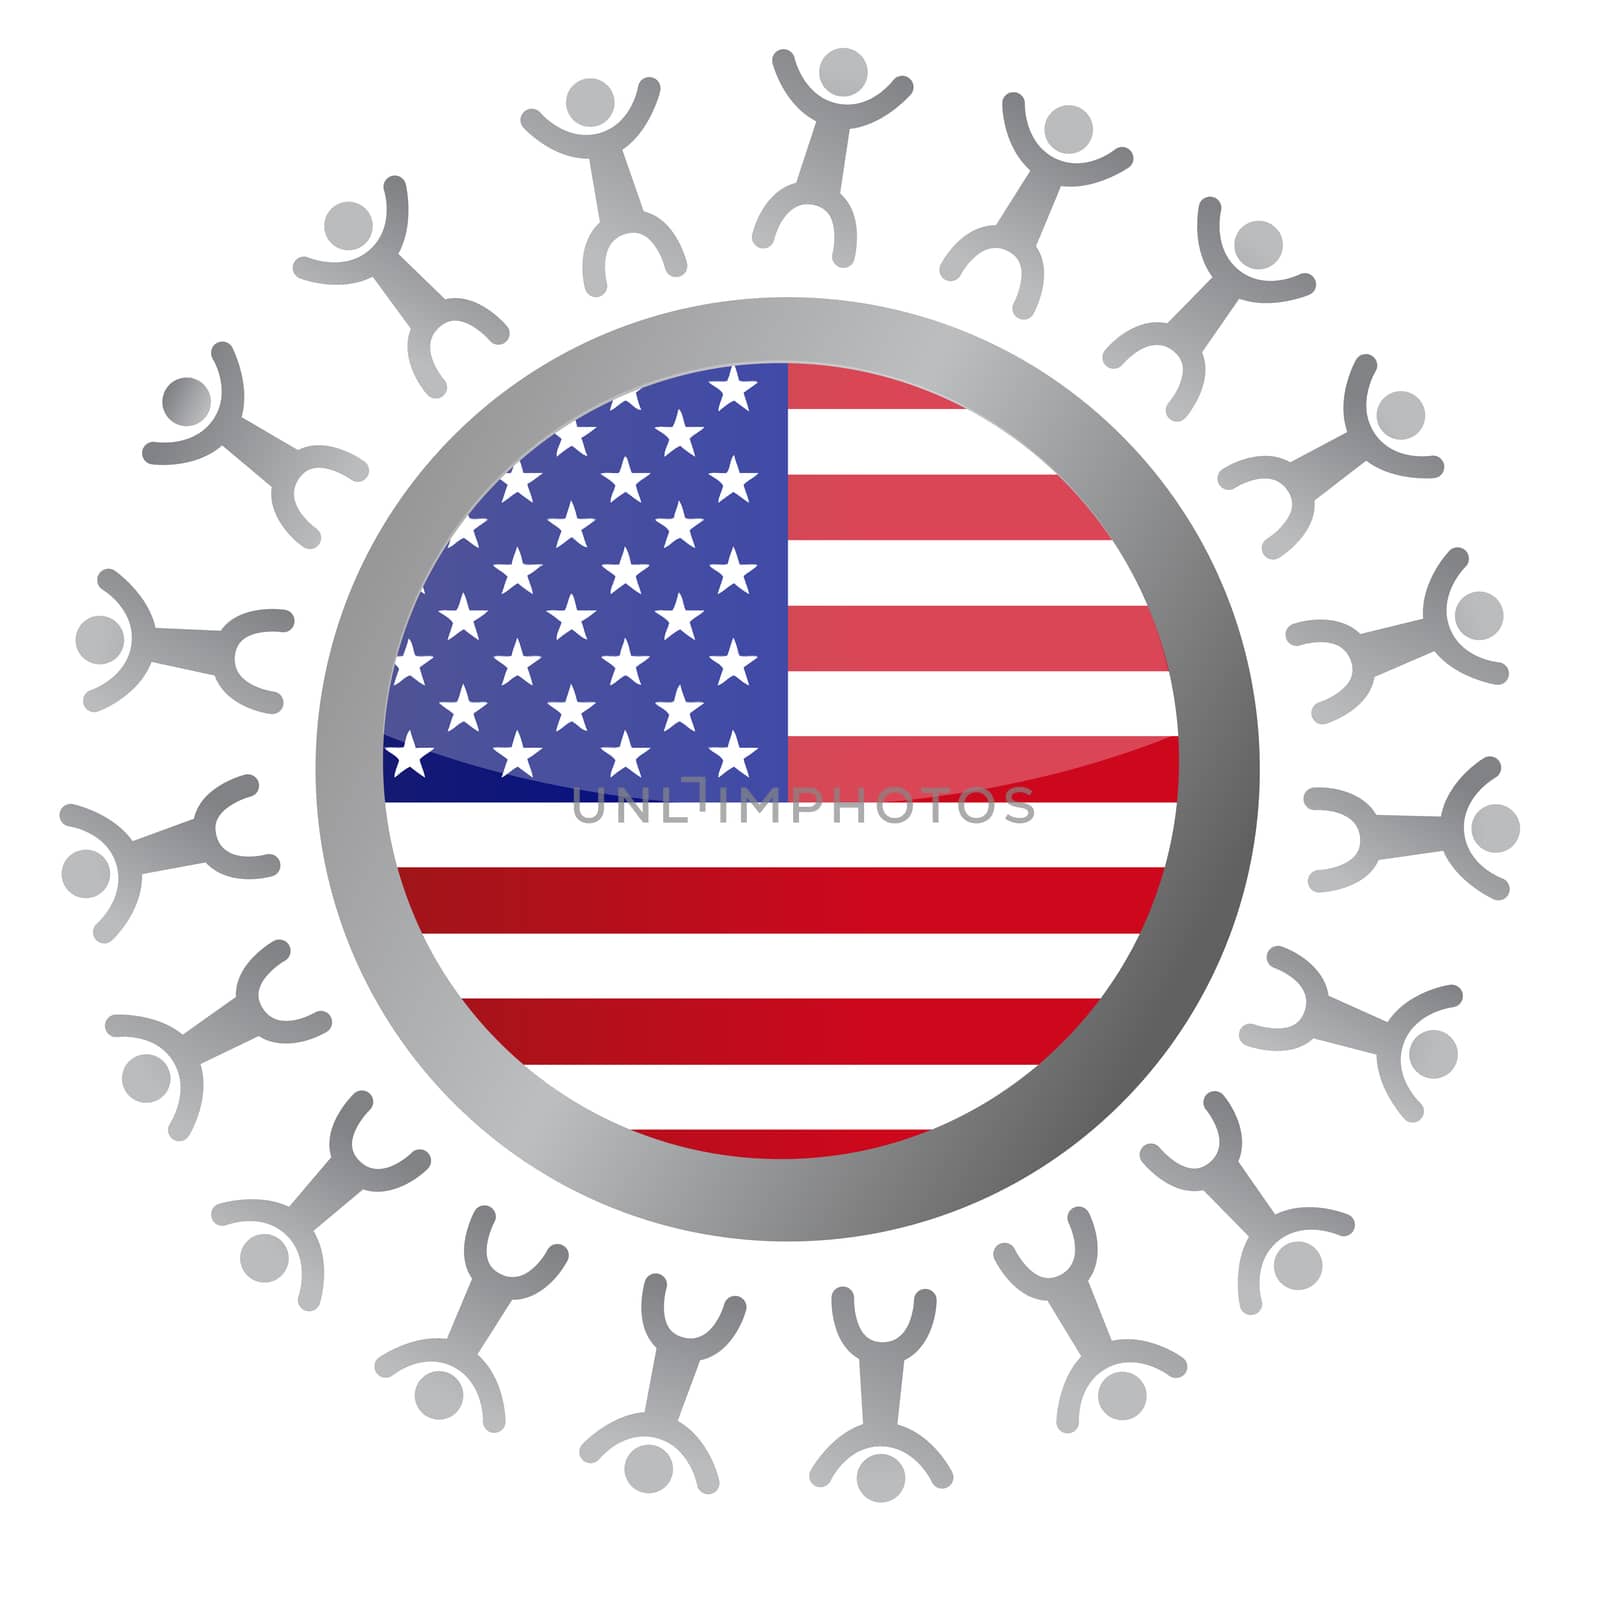 people around a us flag illustration design over white by alexmillos